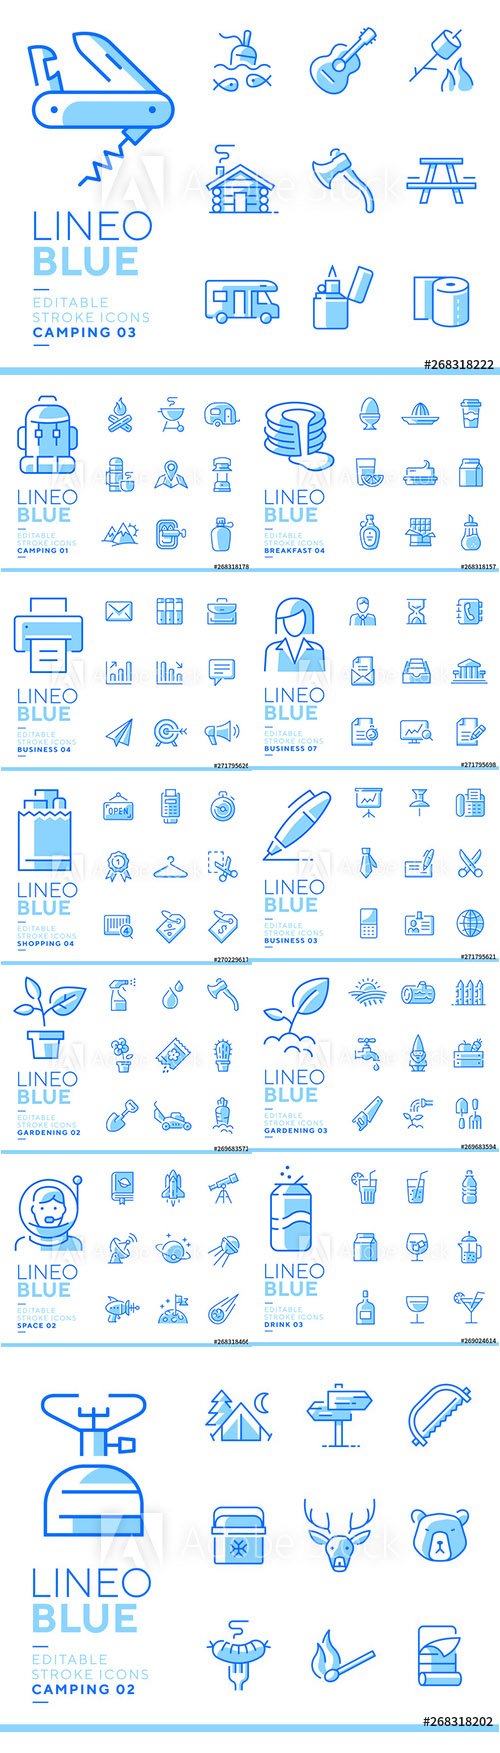 Lineo Blue - Line Icons Vector Pack Vol 2